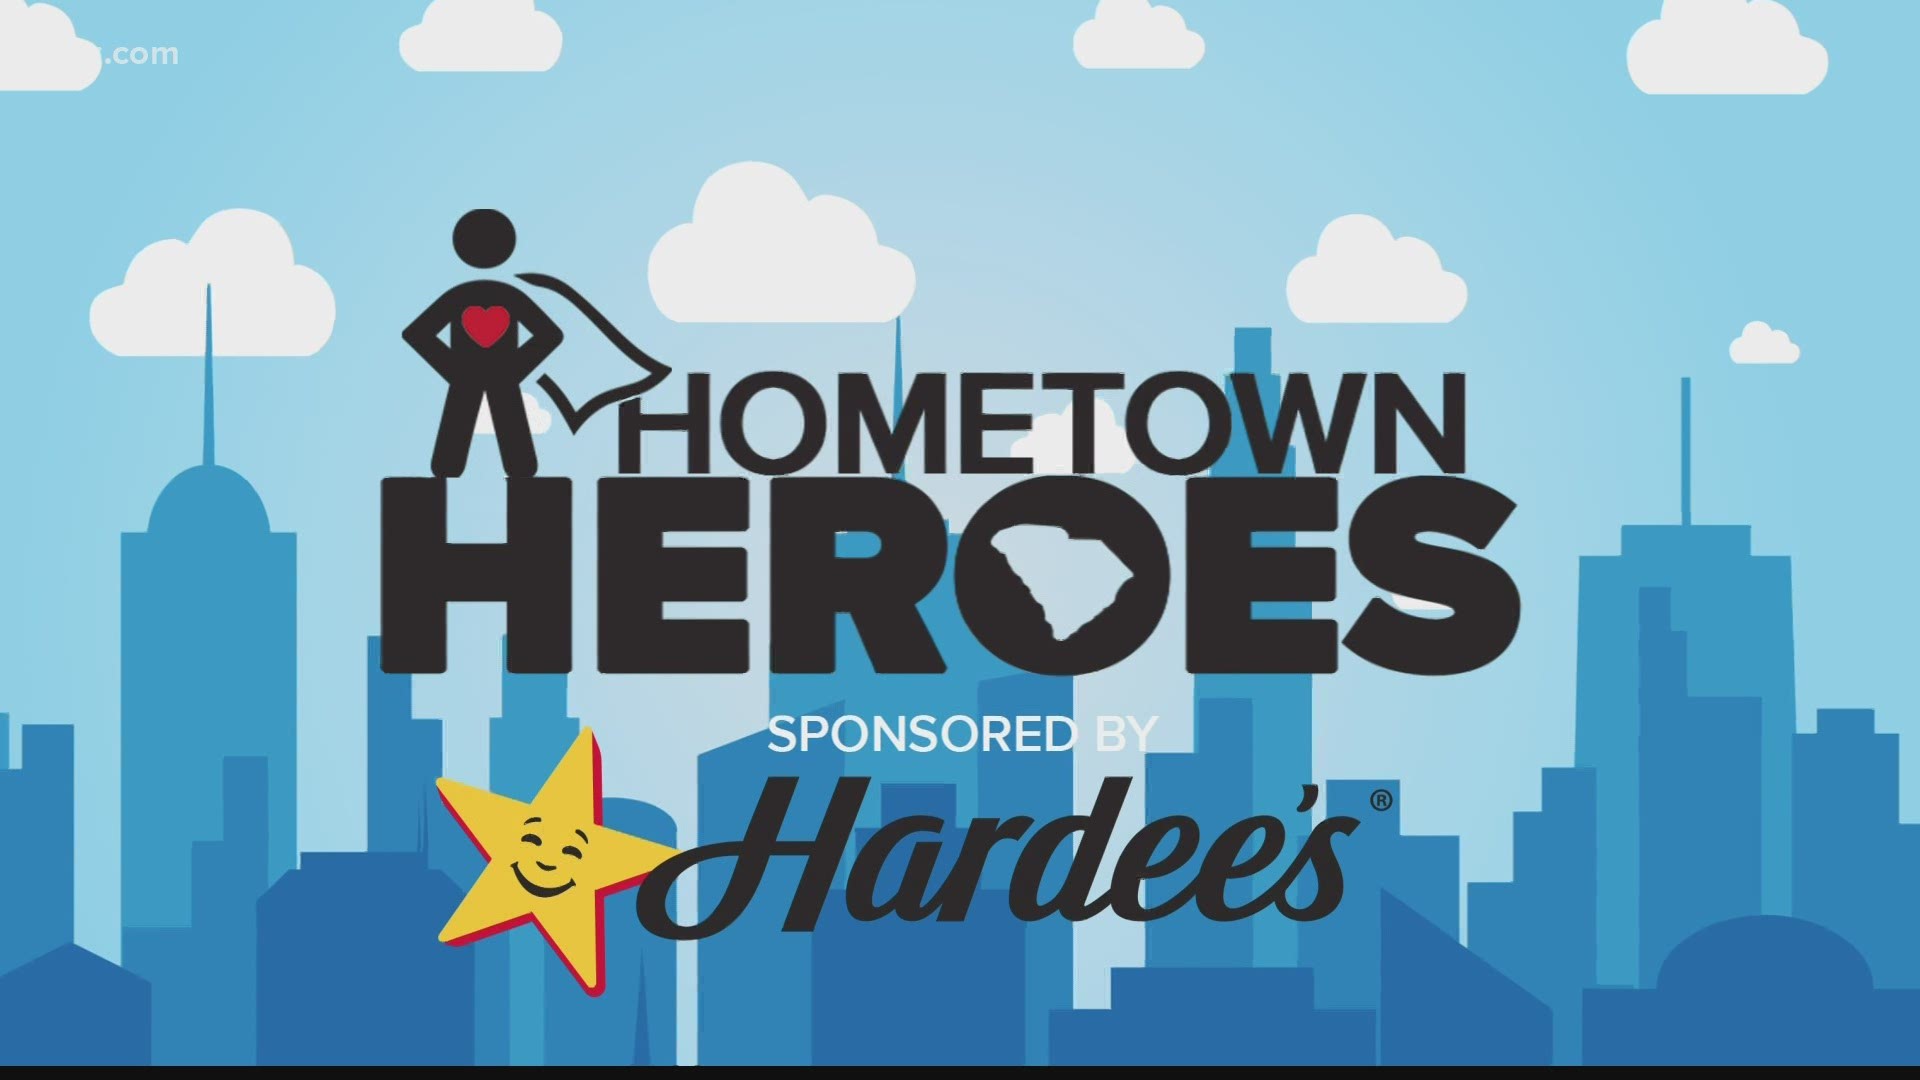 Erika Michelle Brown and Jermaine Singletary are this week's Hometown Heroes due to their compassion and commitment towards the community.